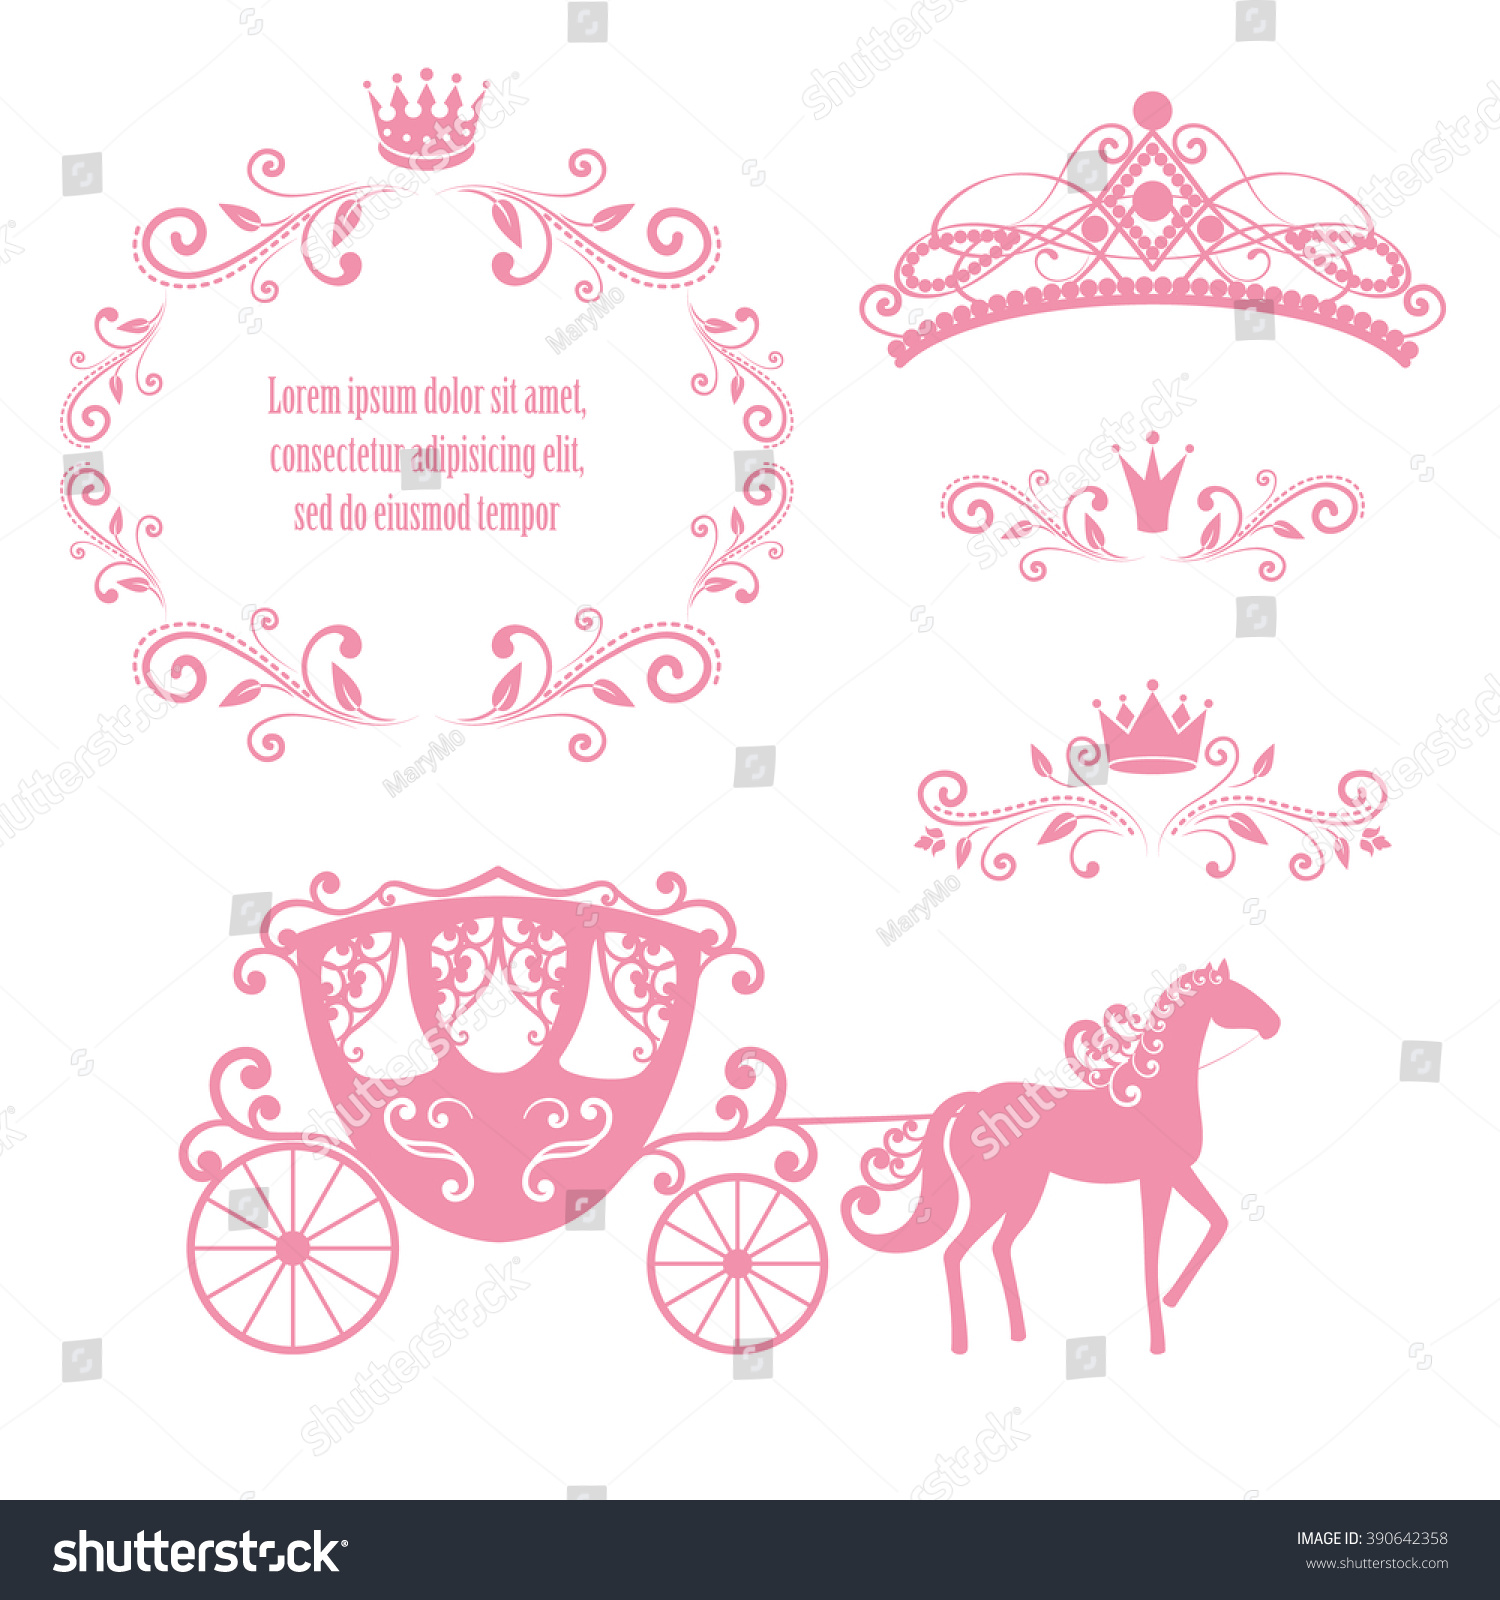 SVG of Design elements, vintage royalty frame with crown, ornamental style diadem, carriage in pink color. Vector illustration. Isolated on white background. Can use for birthday card, wedding invitations. svg